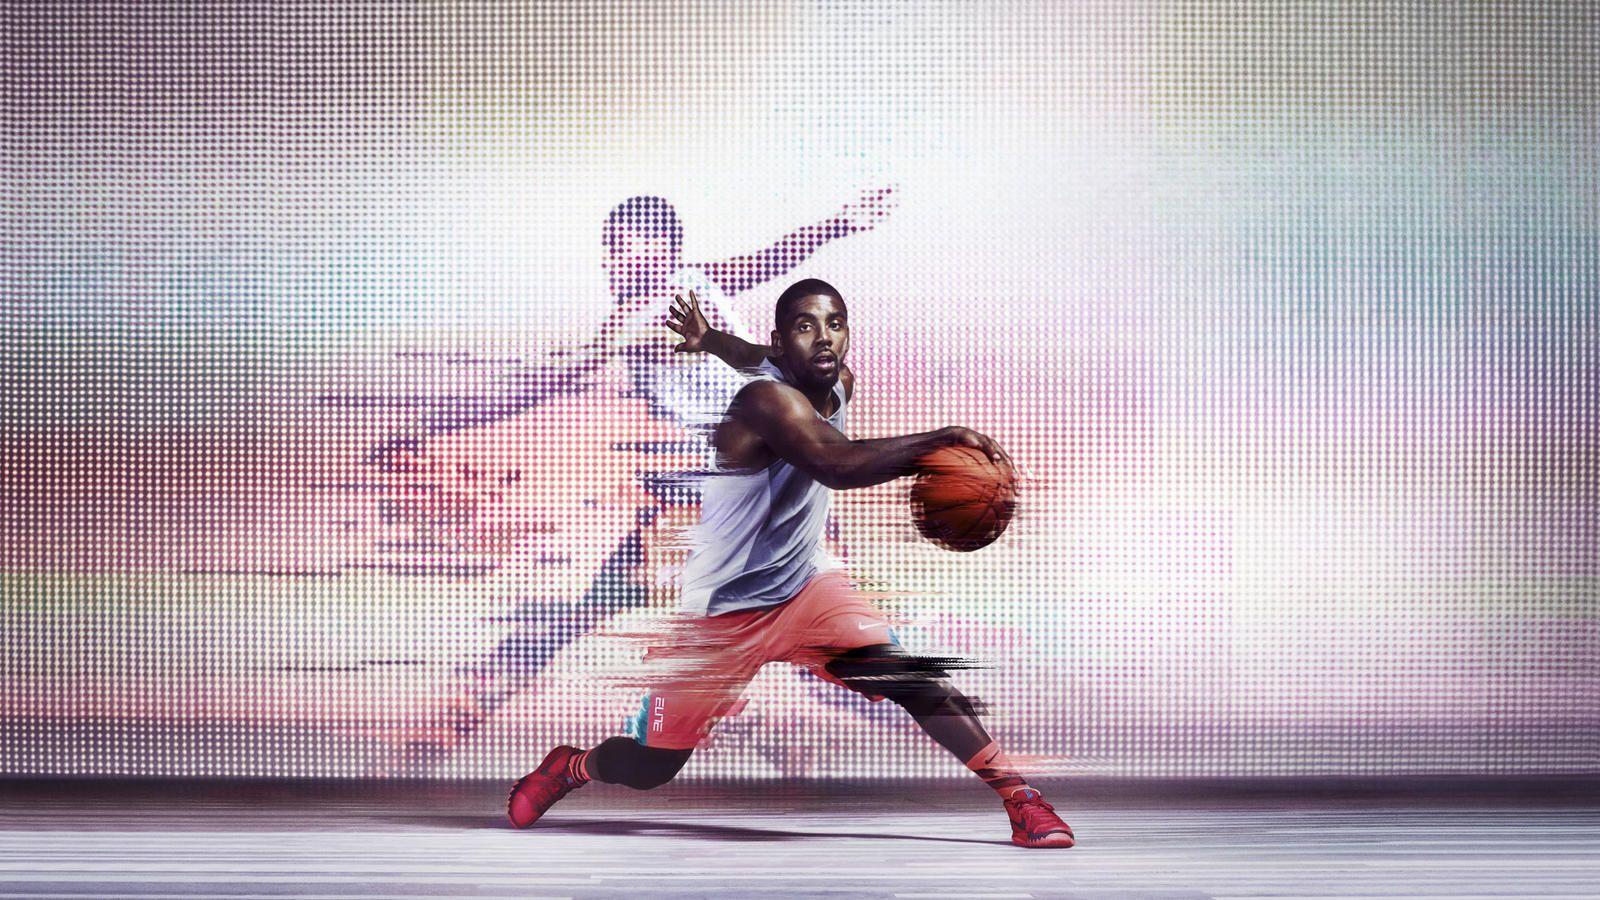 Kyrie Irving Logo - Nike Welcomes Kyrie Irving to its Esteemed Signature Athlete Family